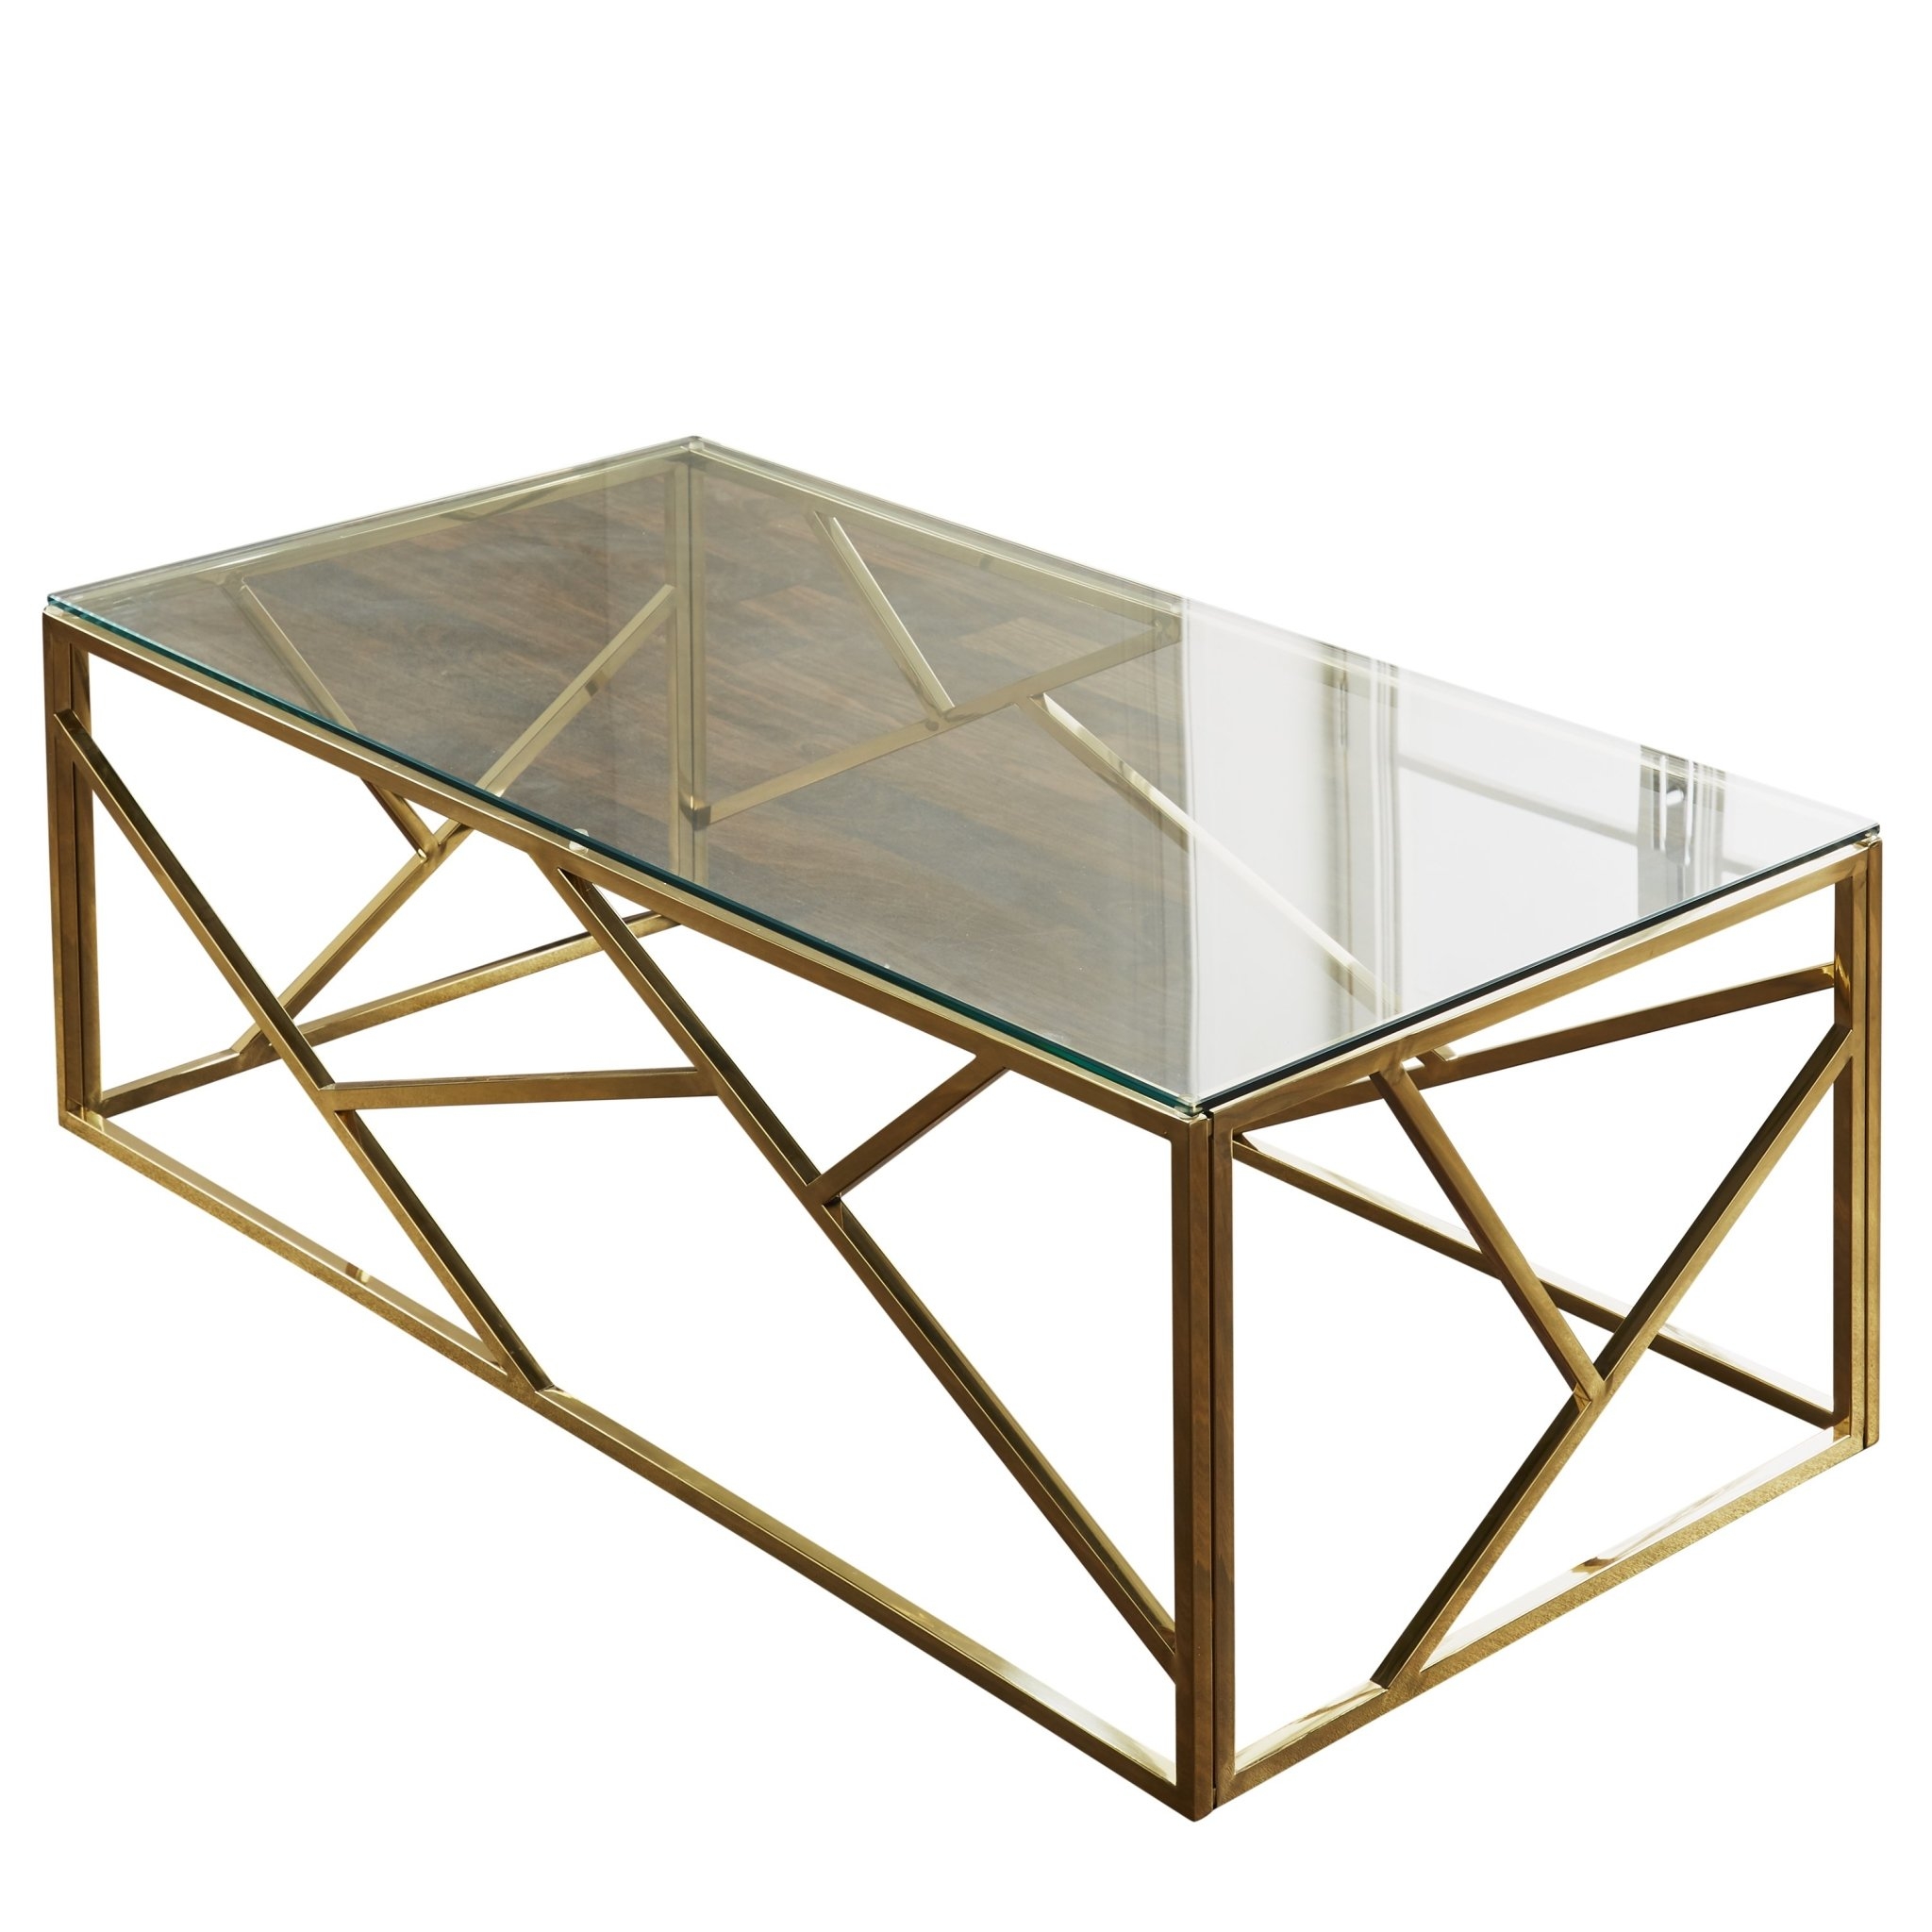 Native Home & Lifestyle Geometric Coffee Table In Gold 120 x 60 x 40cm – Furniture & Homeware – The Luxe Home